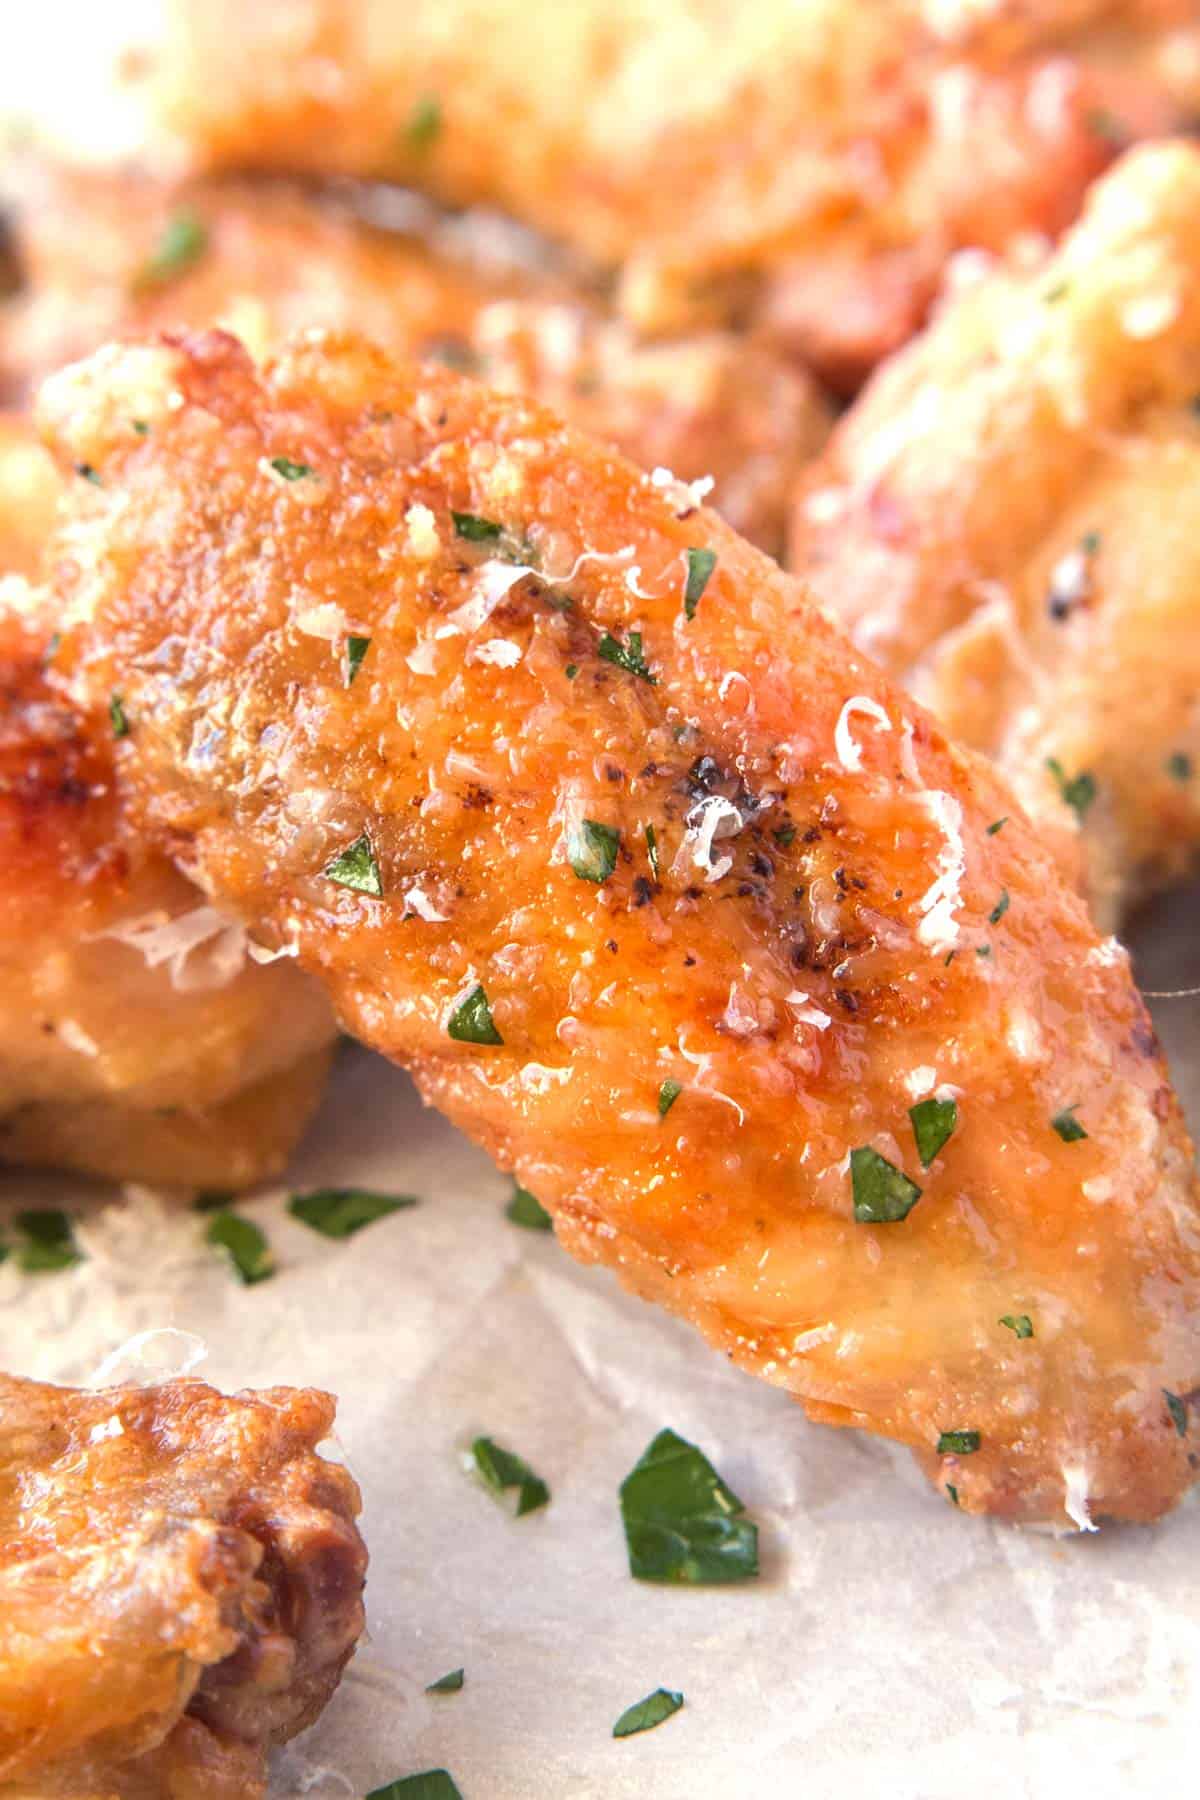 Parmesan and garlic chicken wings sprinkled with parsley.